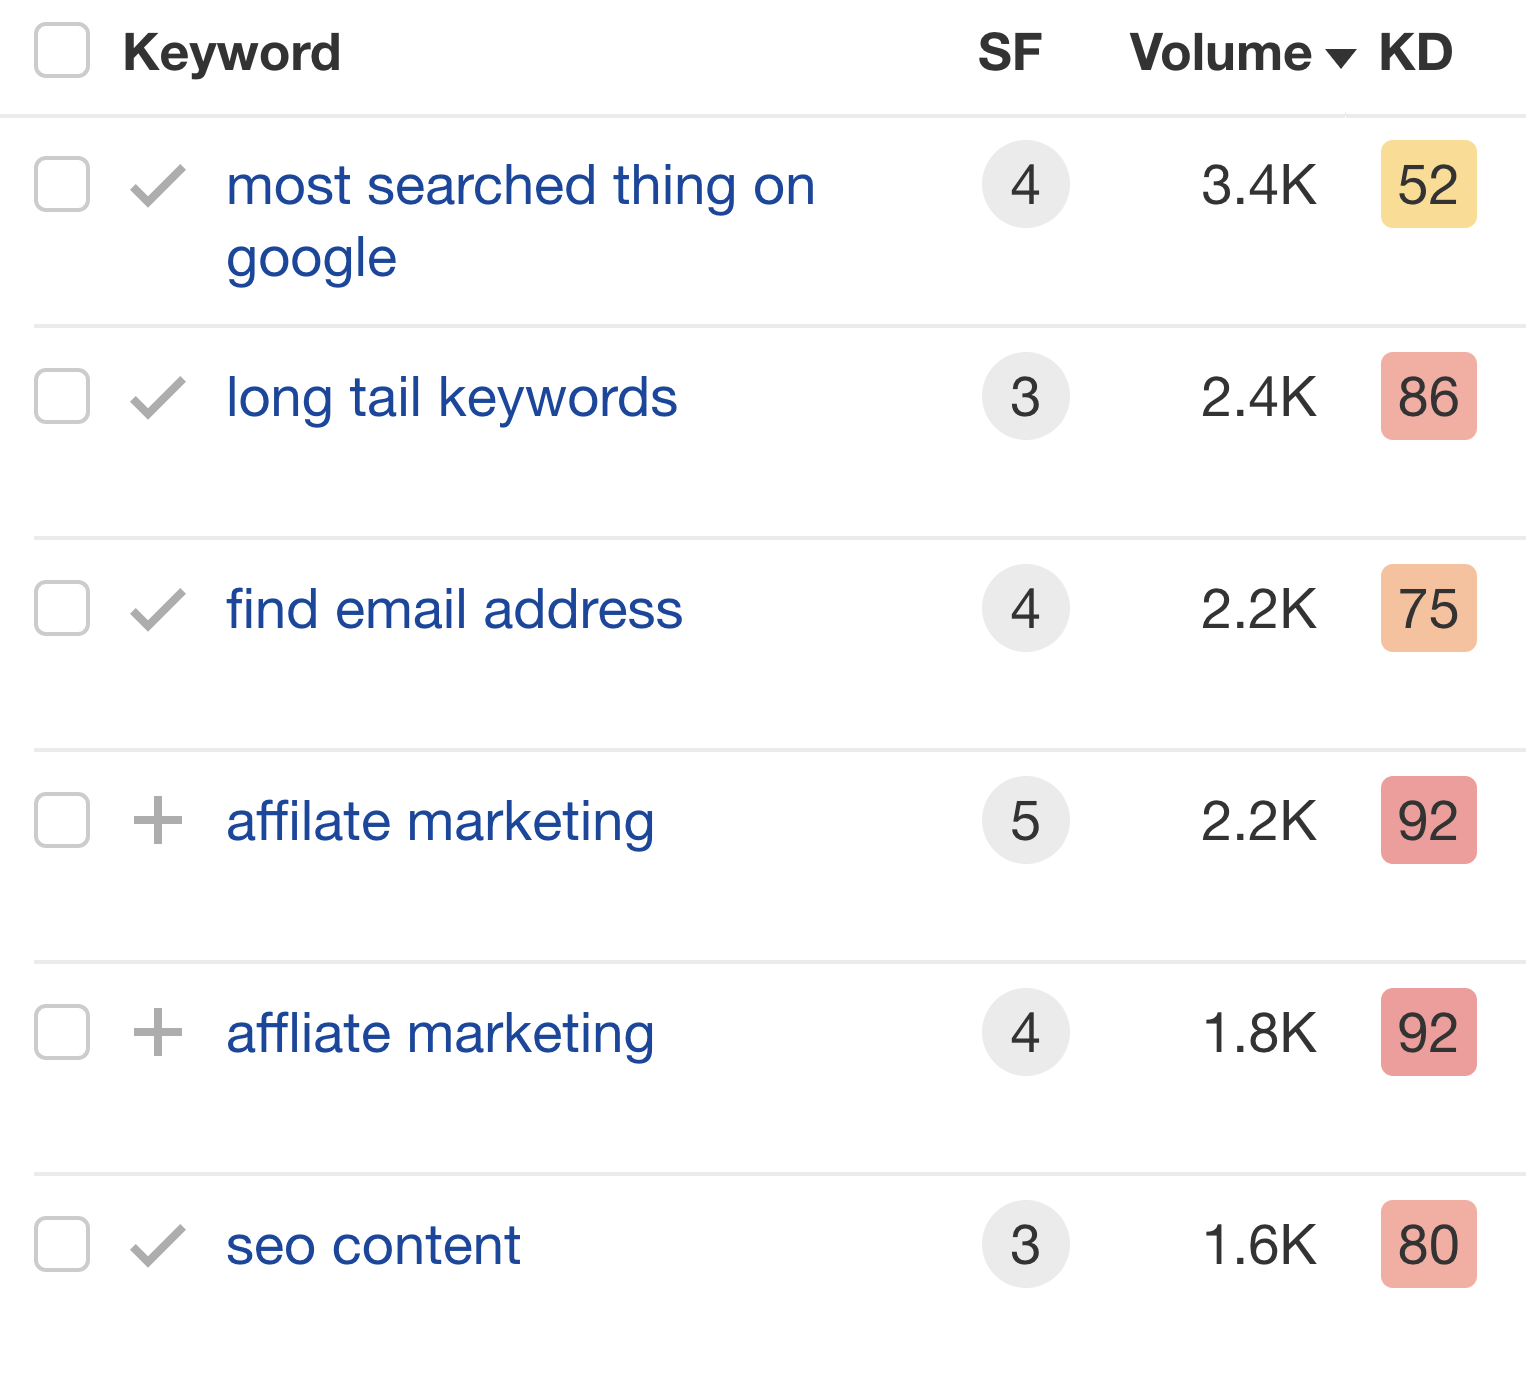 Keywords with good featured snippet opportunities